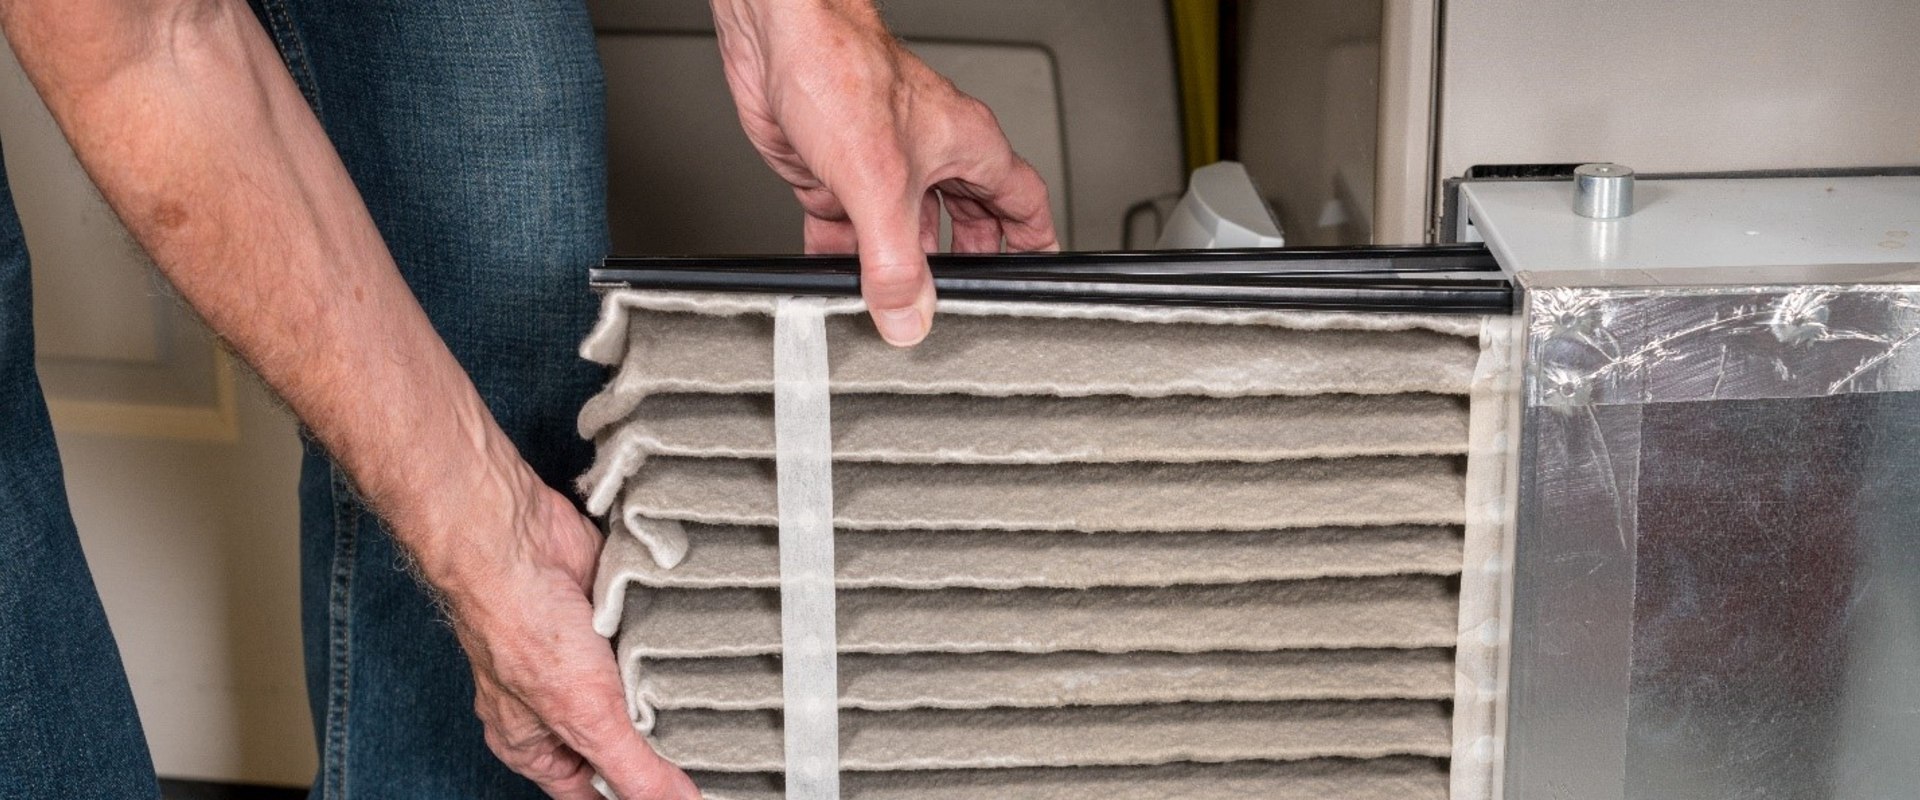 How Long Do Washable Furnace Filters Last? - An Expert's Guide